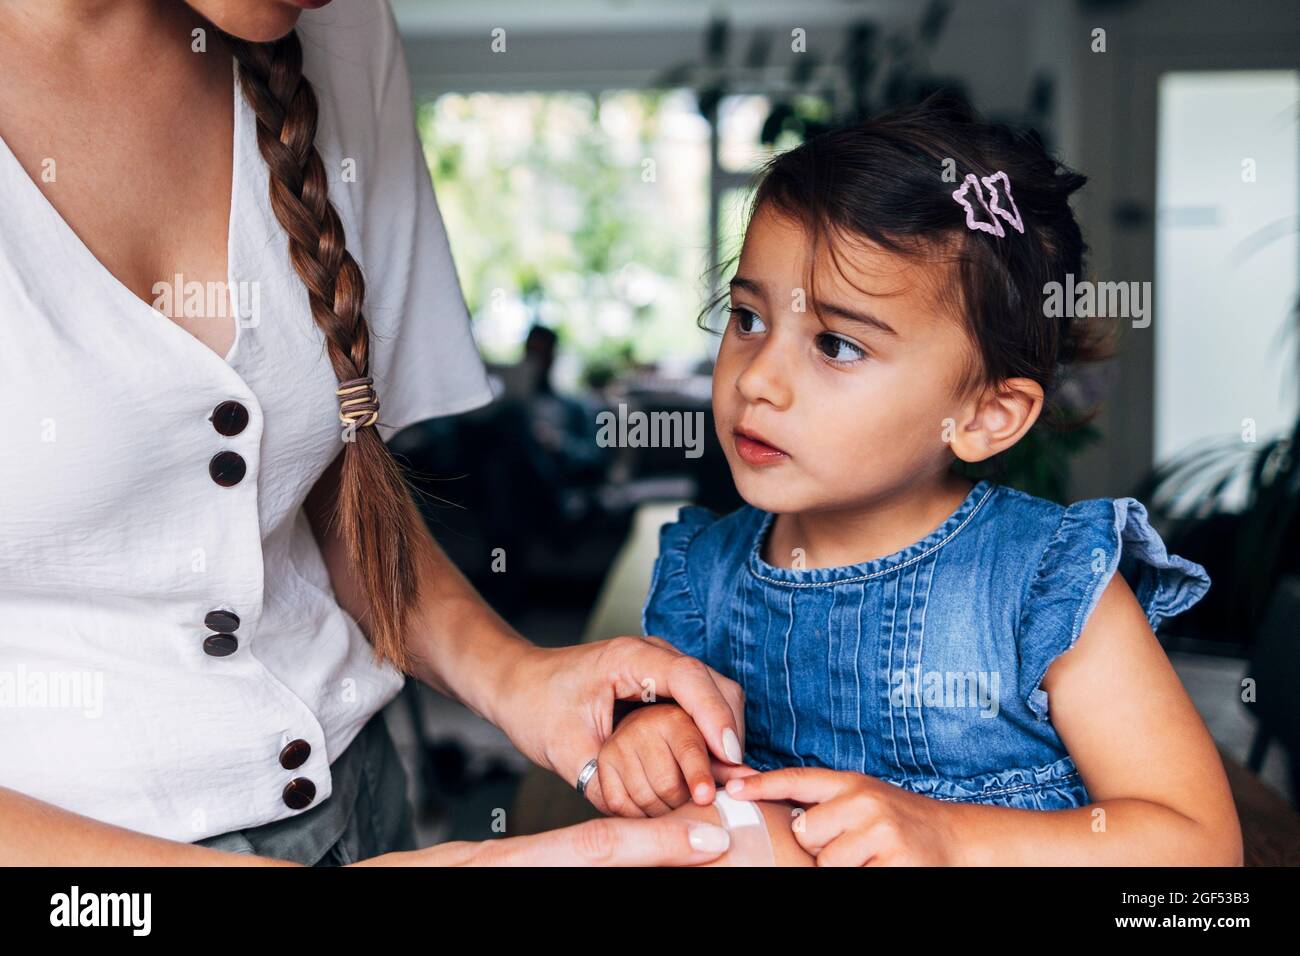 Woman putting adhesive bandage on girl's knee at home Stock Photo